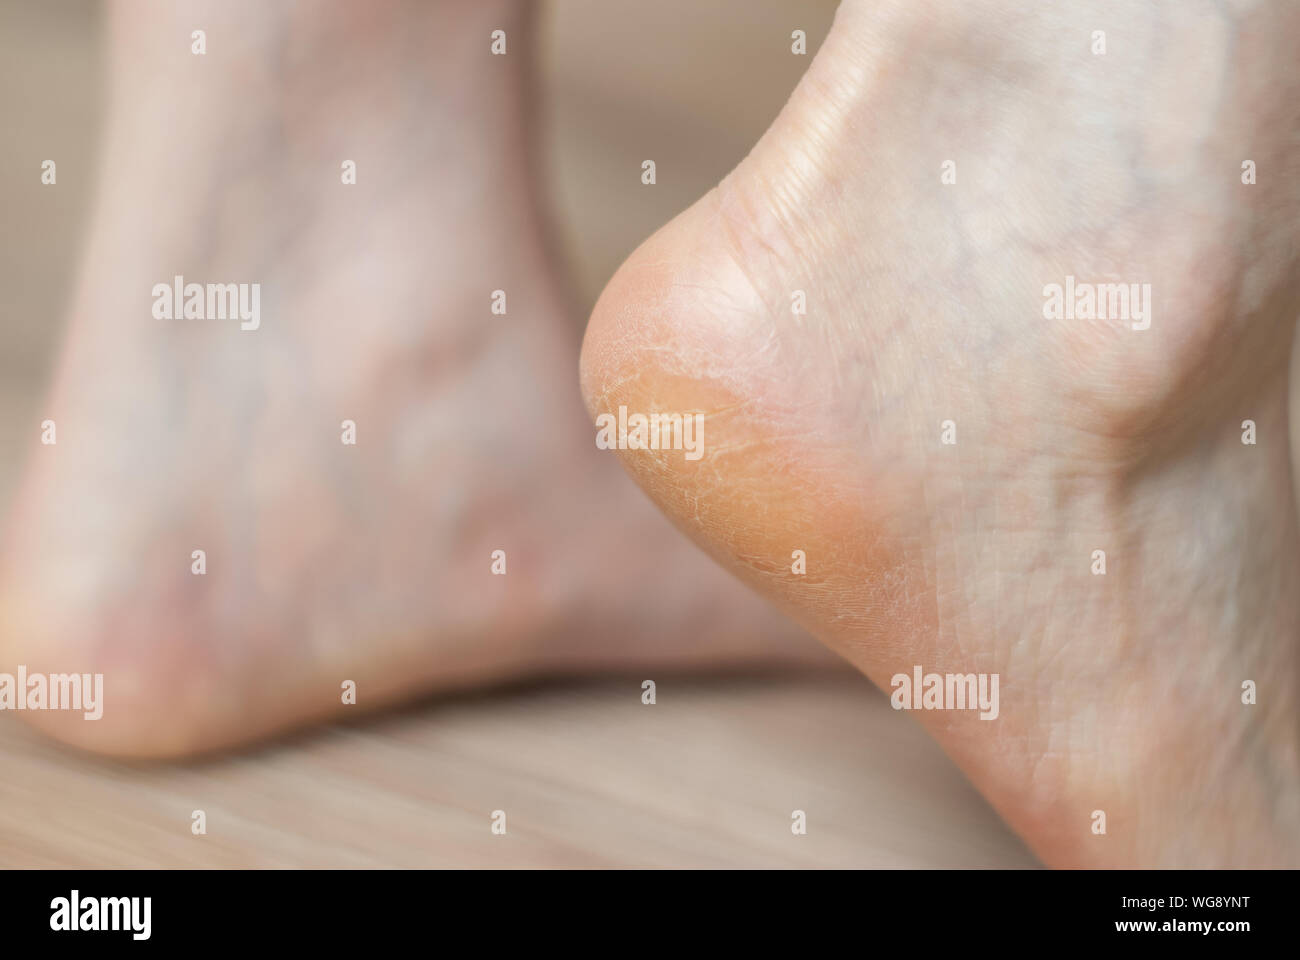 clavus and cracks on the heel of female foot close-up Stock Photo